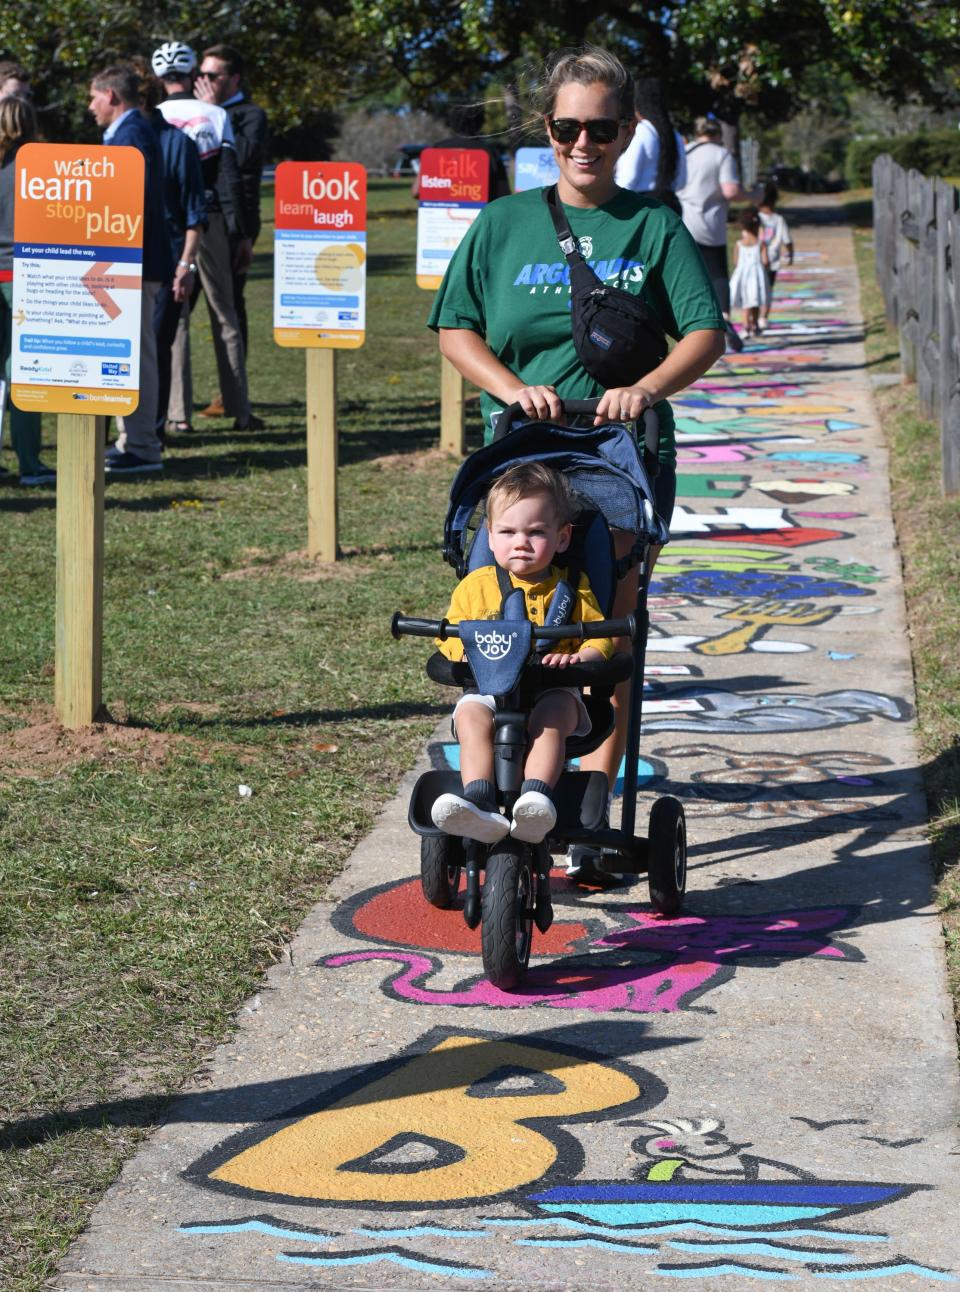 Hannah Kessler pushes her 15-month-old son Fitz down the new Born Learning Trail at Bayview Park in Pensacola on Tuesday, Oct. 24, 2023. This newest Born Learning Trail was created by the Pensacola News Journal in association with Ready Kids!, the United Way of West Florida, and the Sunstone Project.